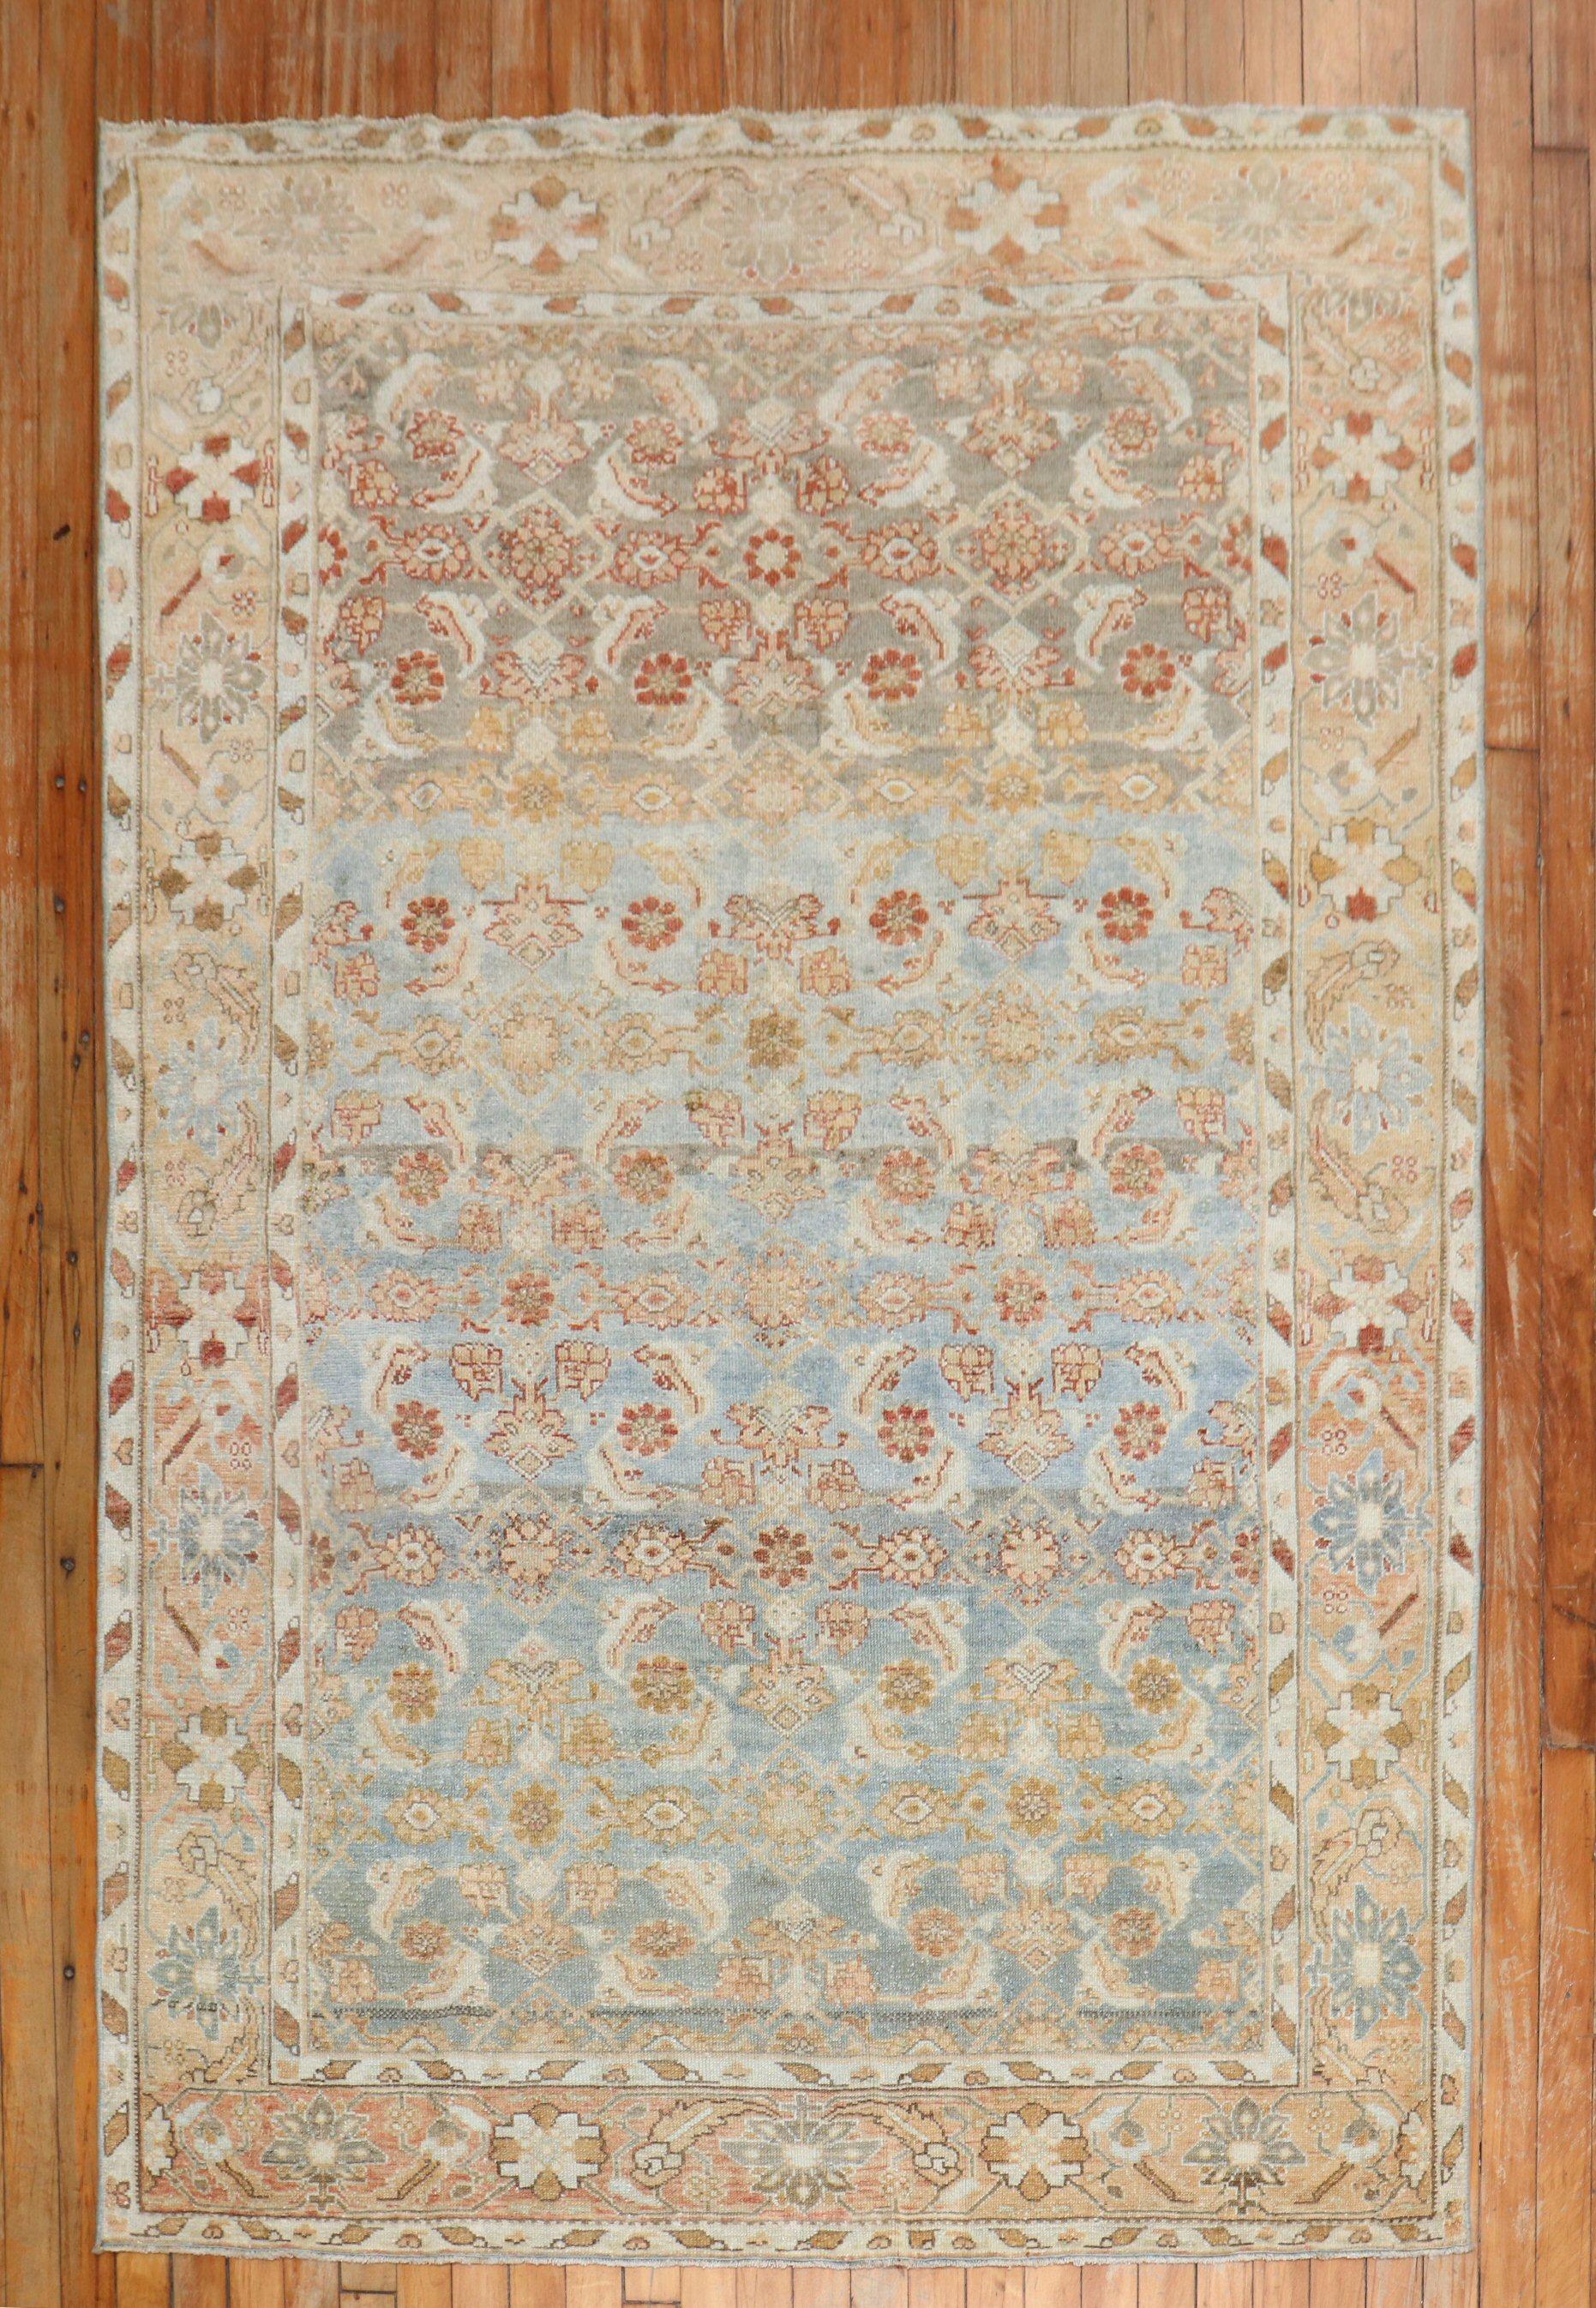 An accent size early 20th century Persian Malayer rug in light blues and peach tones

Measures: 4'6 x 6'15